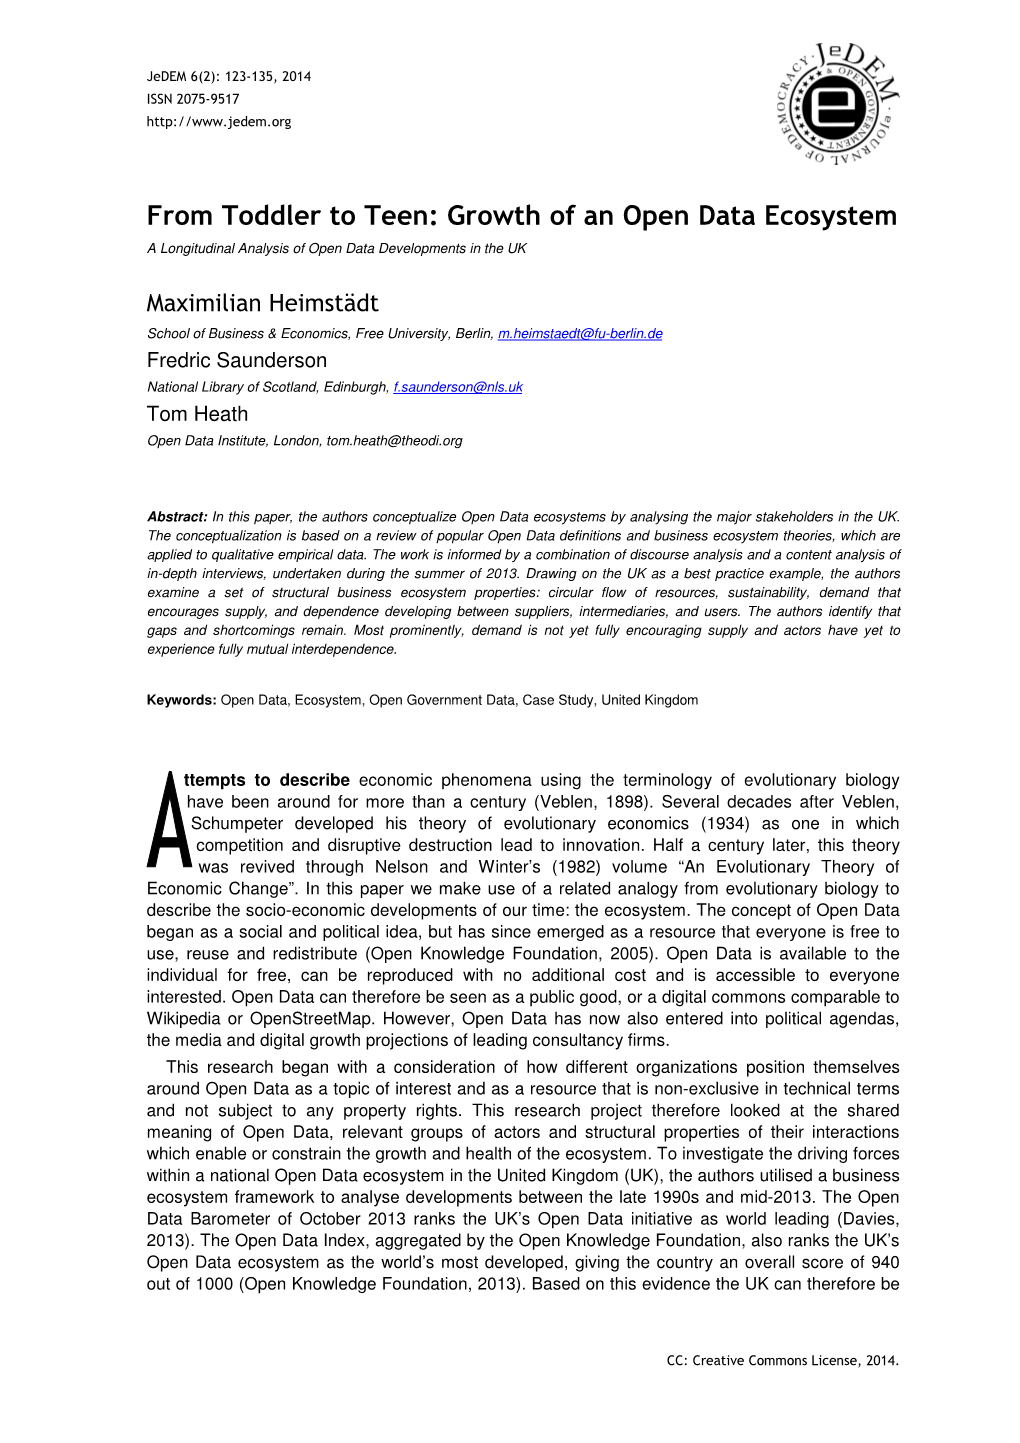 From Toddler to Teen: Growth of an Open Data Ecosystem a Longitudinal Analysis of Open Data Developments in the UK